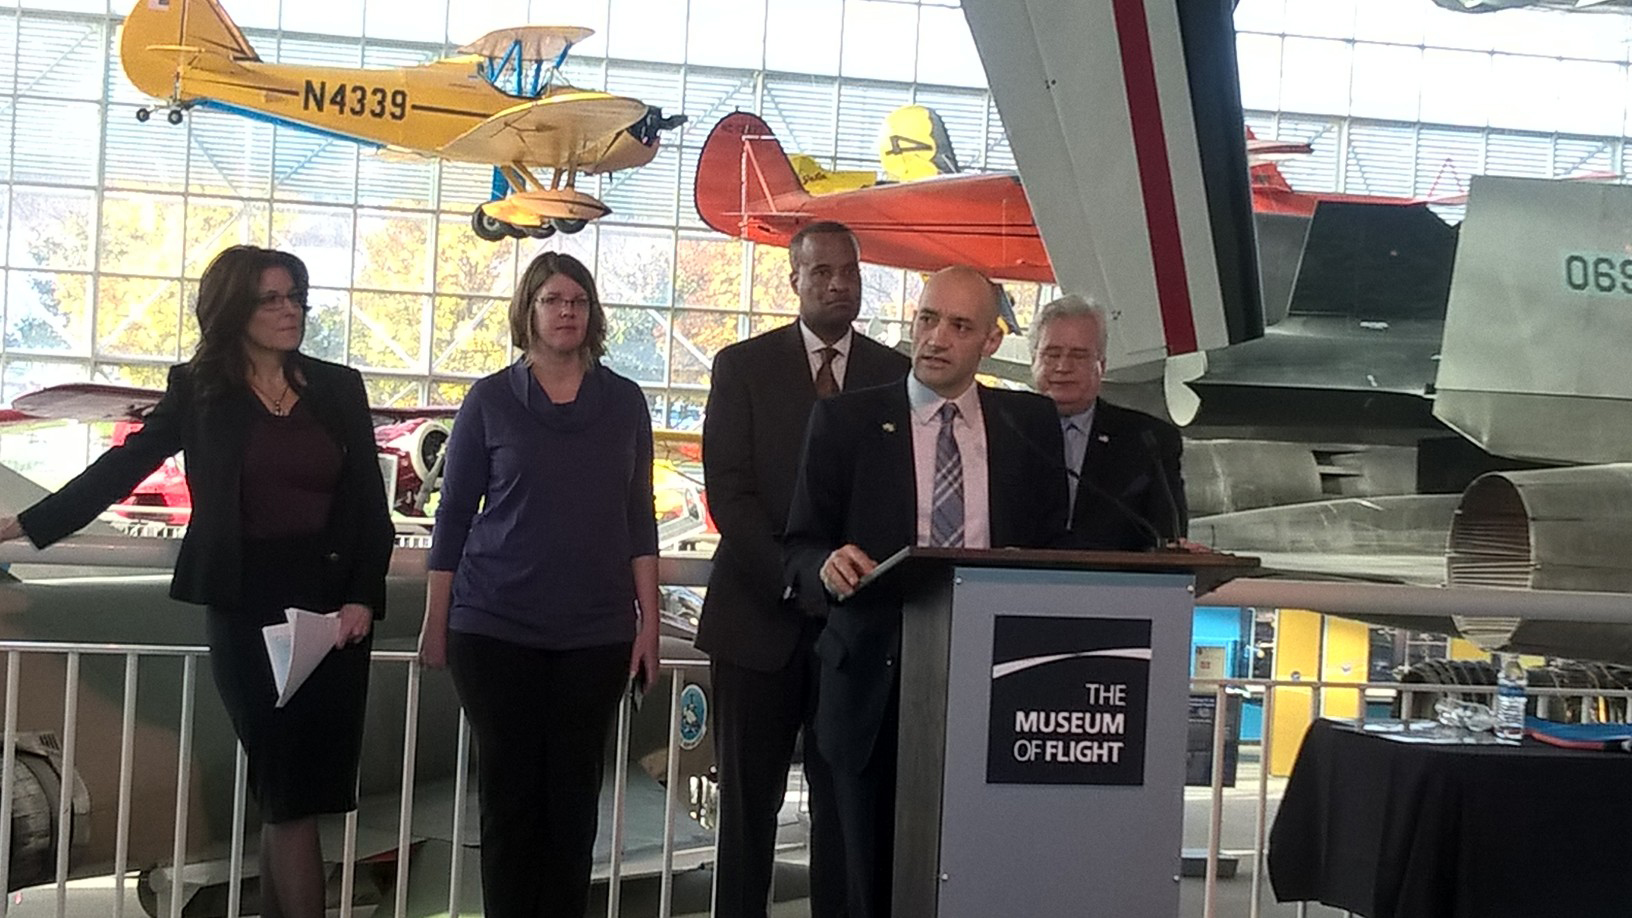 NEWS RELEASE: Washington State’s Composite Recycling Technology Center wins $500K “Innovation Accelerator” grant, debuts first retail product at Museum of Flight